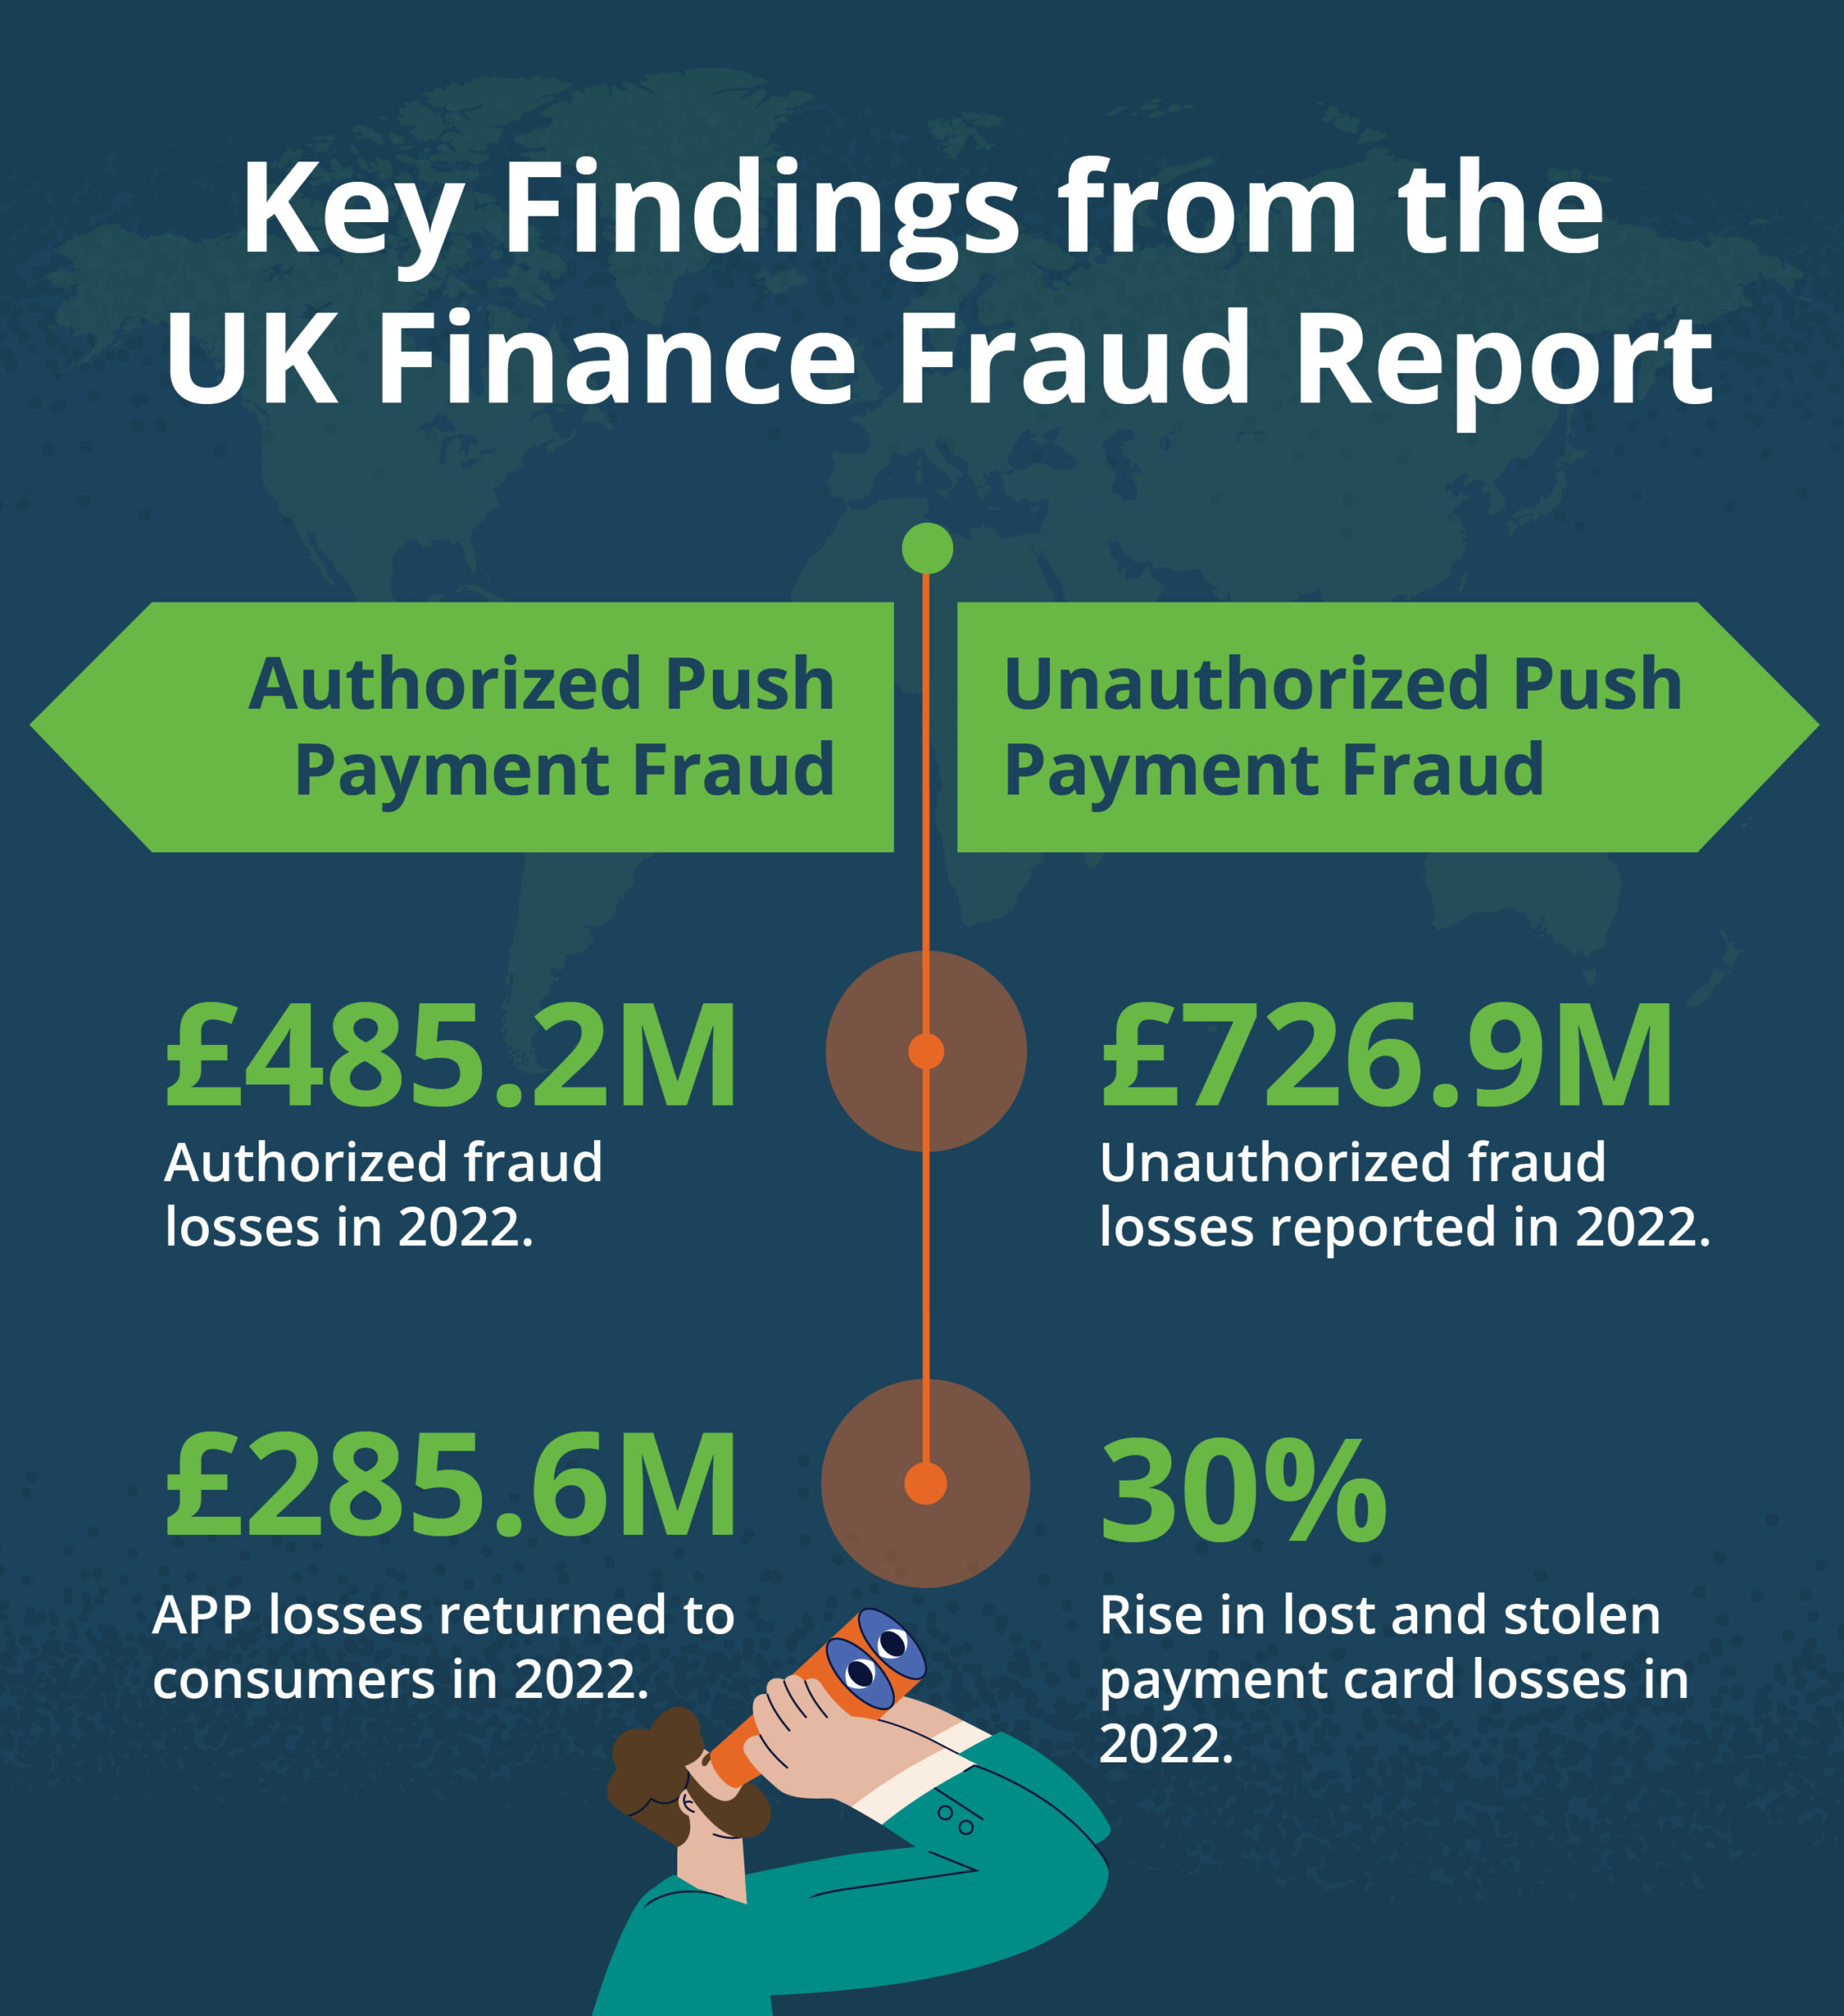 Illustration of man holding binoculars looking at a sign. Text: Key Findings from the UK Finance Fraud Report. Authorized Push Payment Fraud: £485.2M: Authorized fraud losses in 2022; £285.6M: APP losses returned to consumers in 2022. Unauthorized Push Payment Fraud. £726.9M: Unauthorized fraud losses reported in 2022. 30%: Rise in lost and stolen payment card losses in 2022.